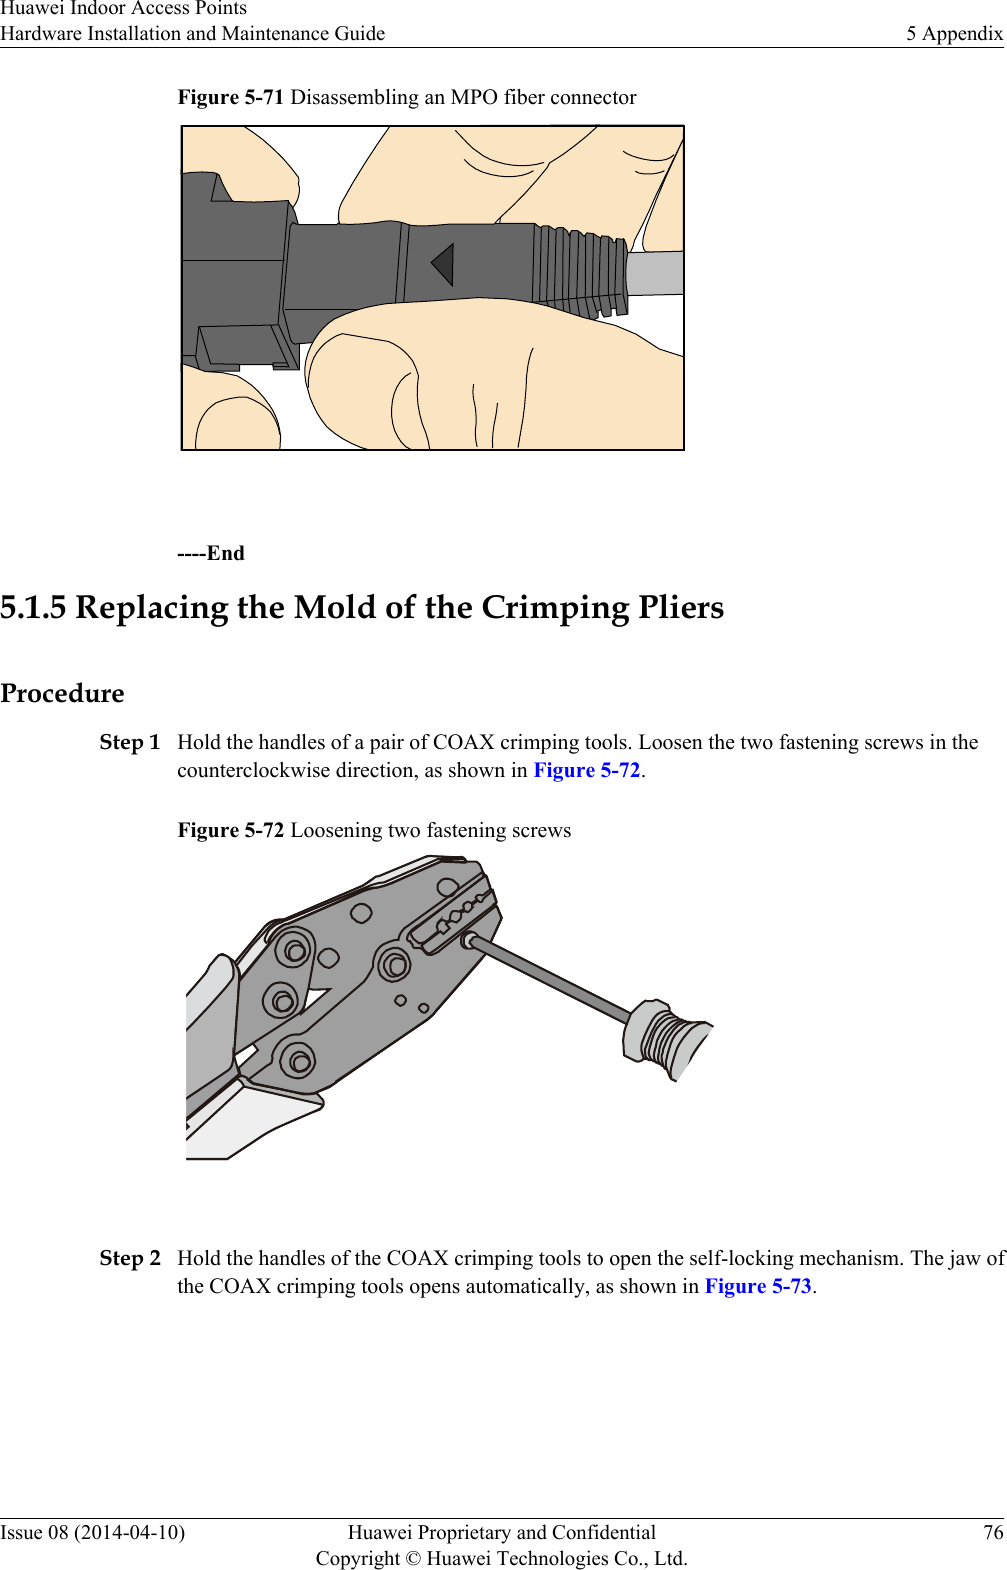 Figure 5-71 Disassembling an MPO fiber connector ----End5.1.5 Replacing the Mold of the Crimping PliersProcedureStep 1 Hold the handles of a pair of COAX crimping tools. Loosen the two fastening screws in thecounterclockwise direction, as shown in Figure 5-72.Figure 5-72 Loosening two fastening screws Step 2 Hold the handles of the COAX crimping tools to open the self-locking mechanism. The jaw ofthe COAX crimping tools opens automatically, as shown in Figure 5-73.Huawei Indoor Access PointsHardware Installation and Maintenance Guide 5 AppendixIssue 08 (2014-04-10) Huawei Proprietary and ConfidentialCopyright © Huawei Technologies Co., Ltd.76